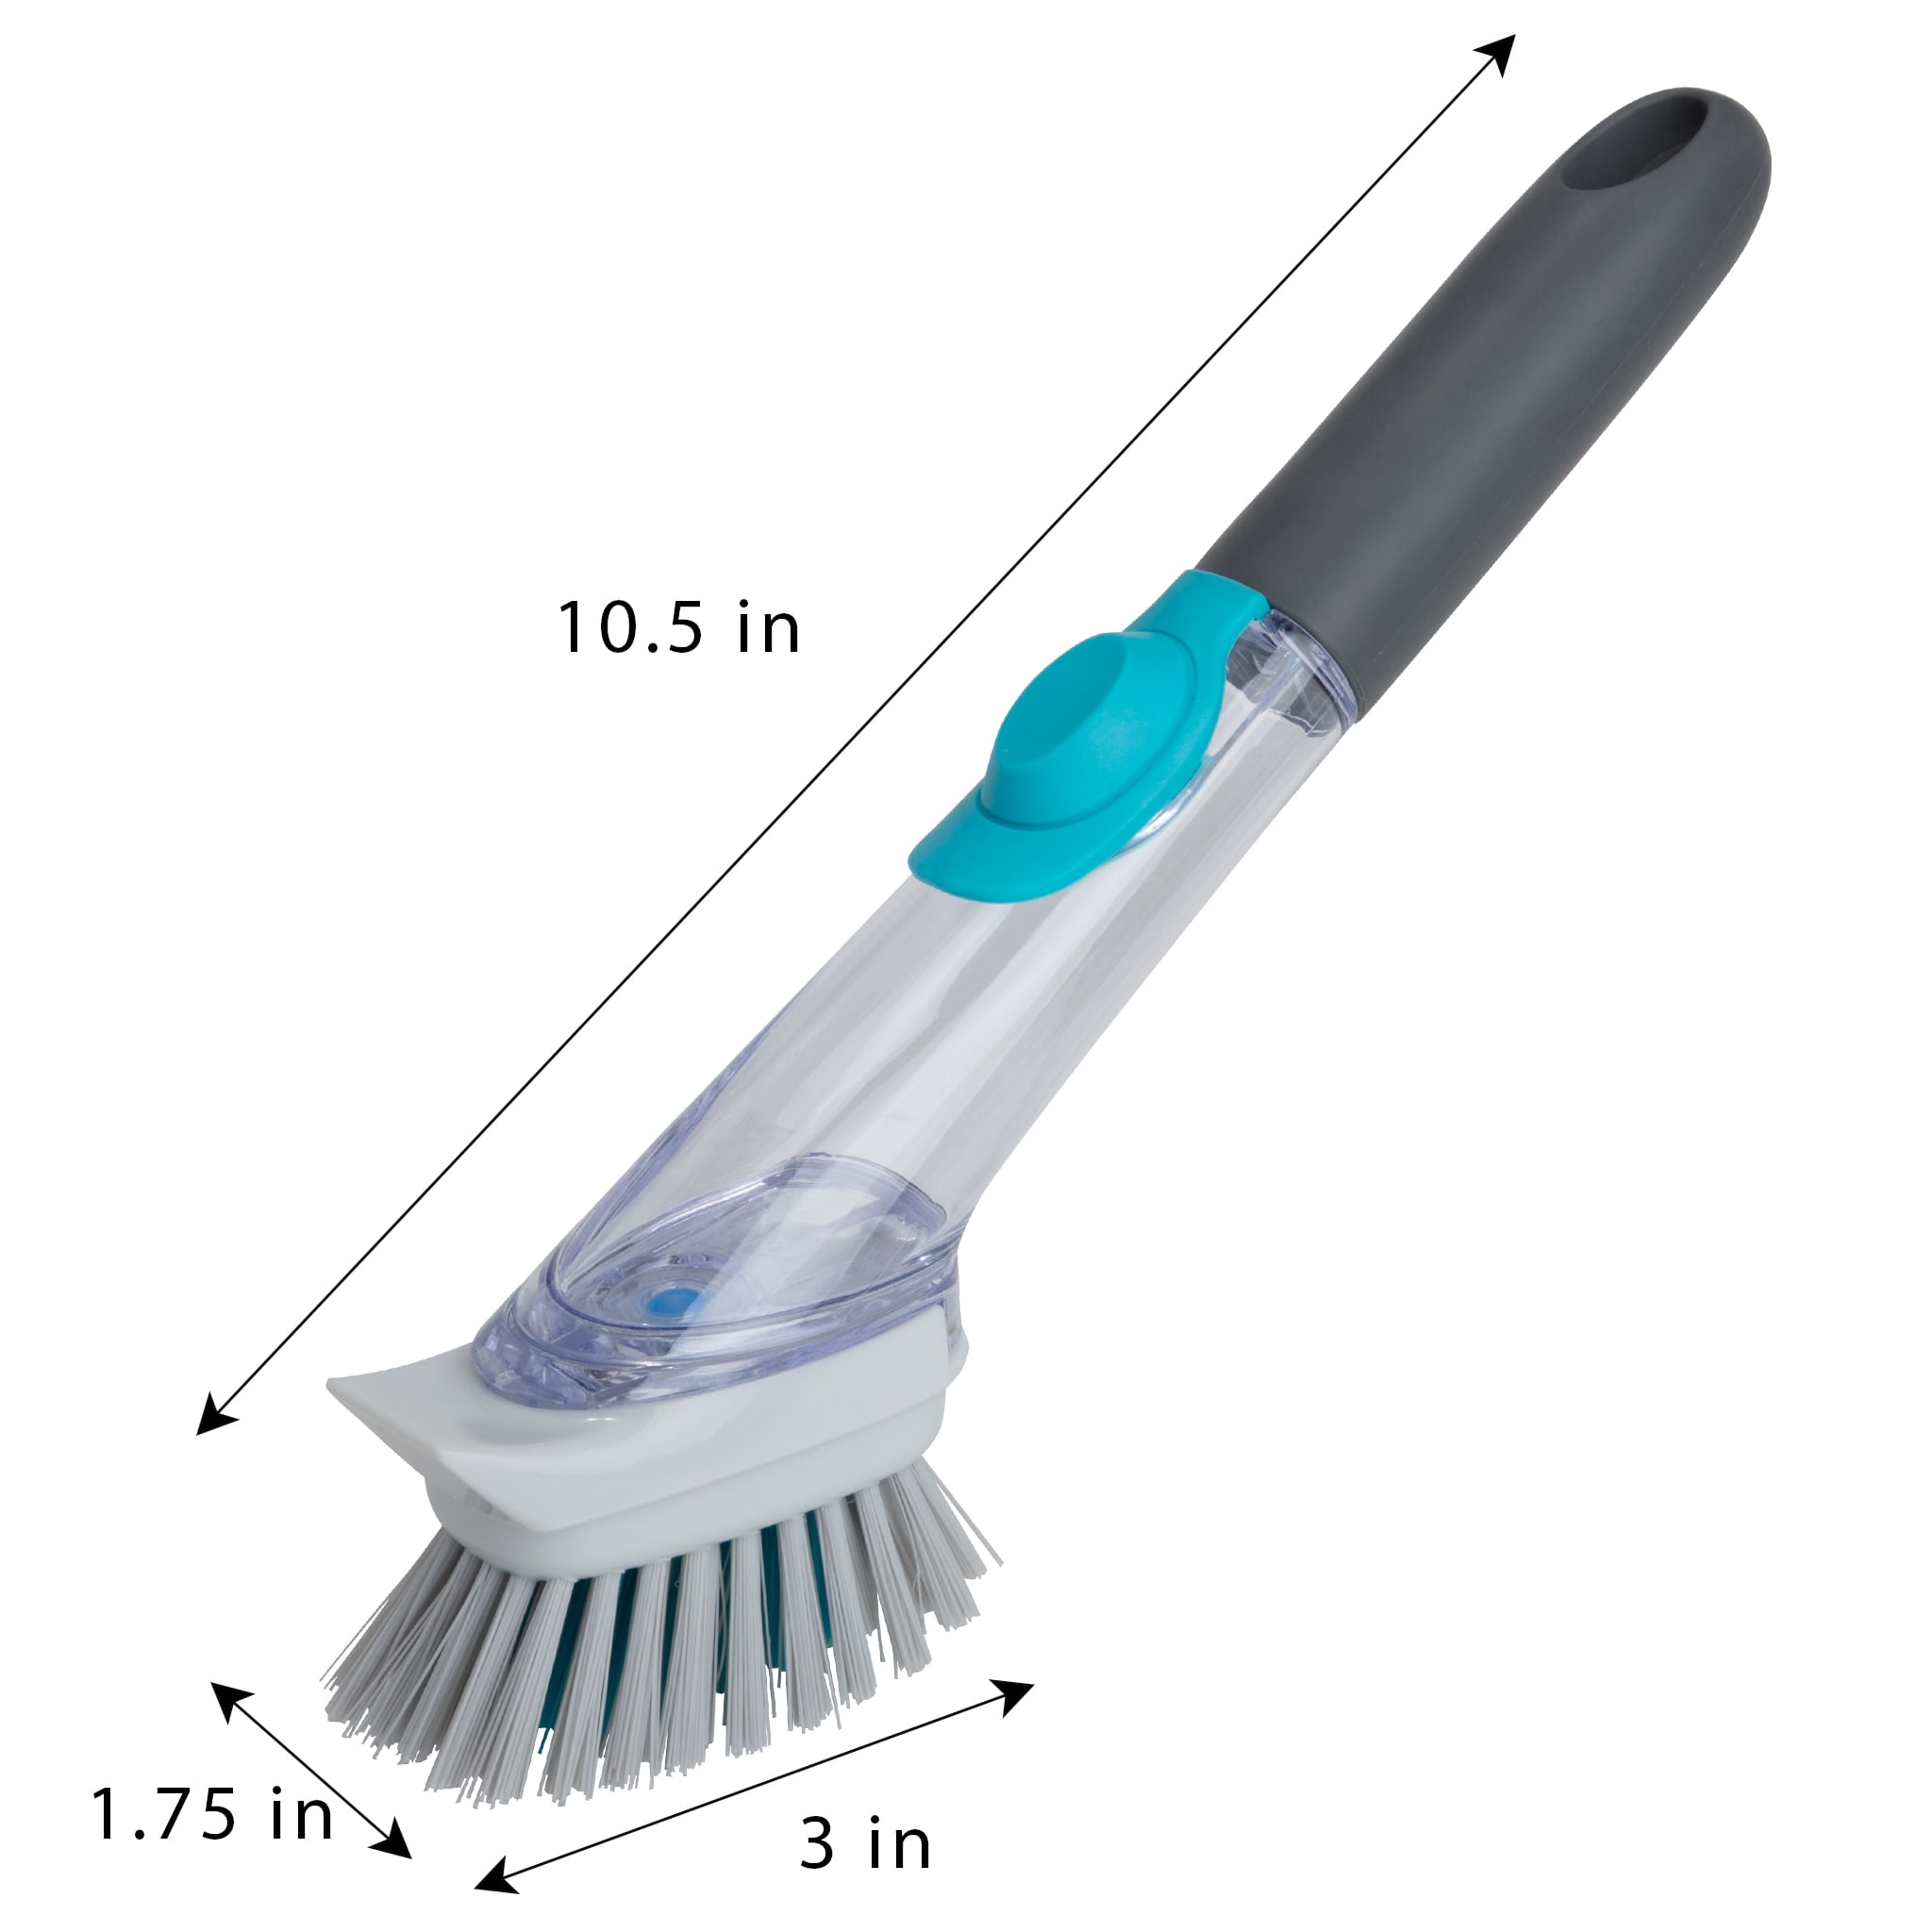 LIGHTSMAX Polypropylene Dish Brush with Soap Dispenser in the